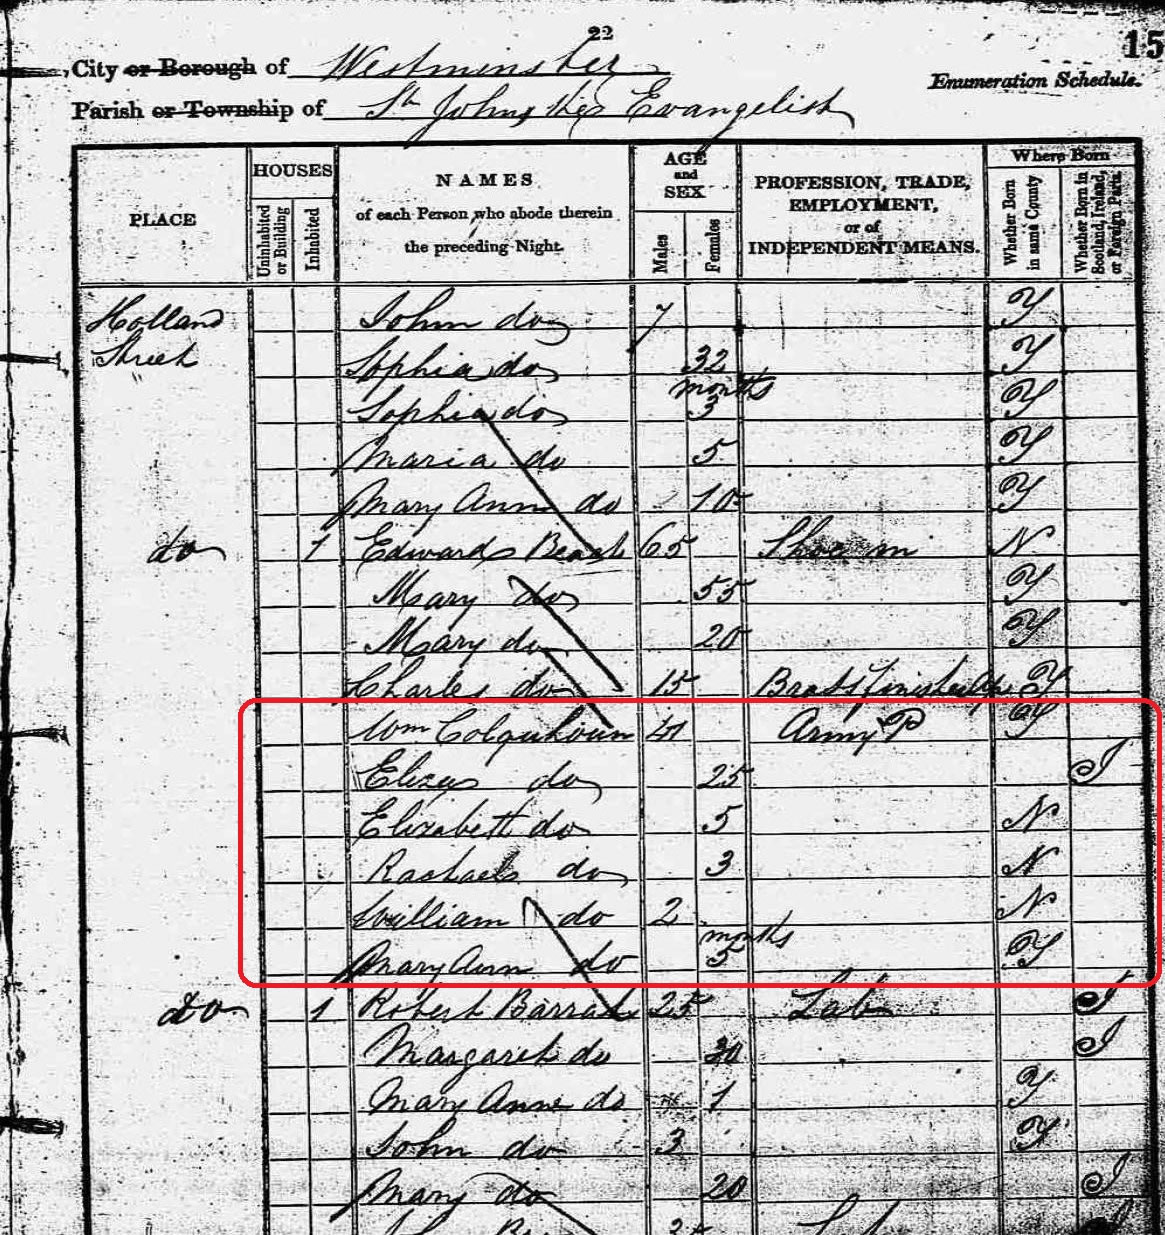 1841 census of Westminster, finds William and Elizabeth Colquhoun living in Holland Street